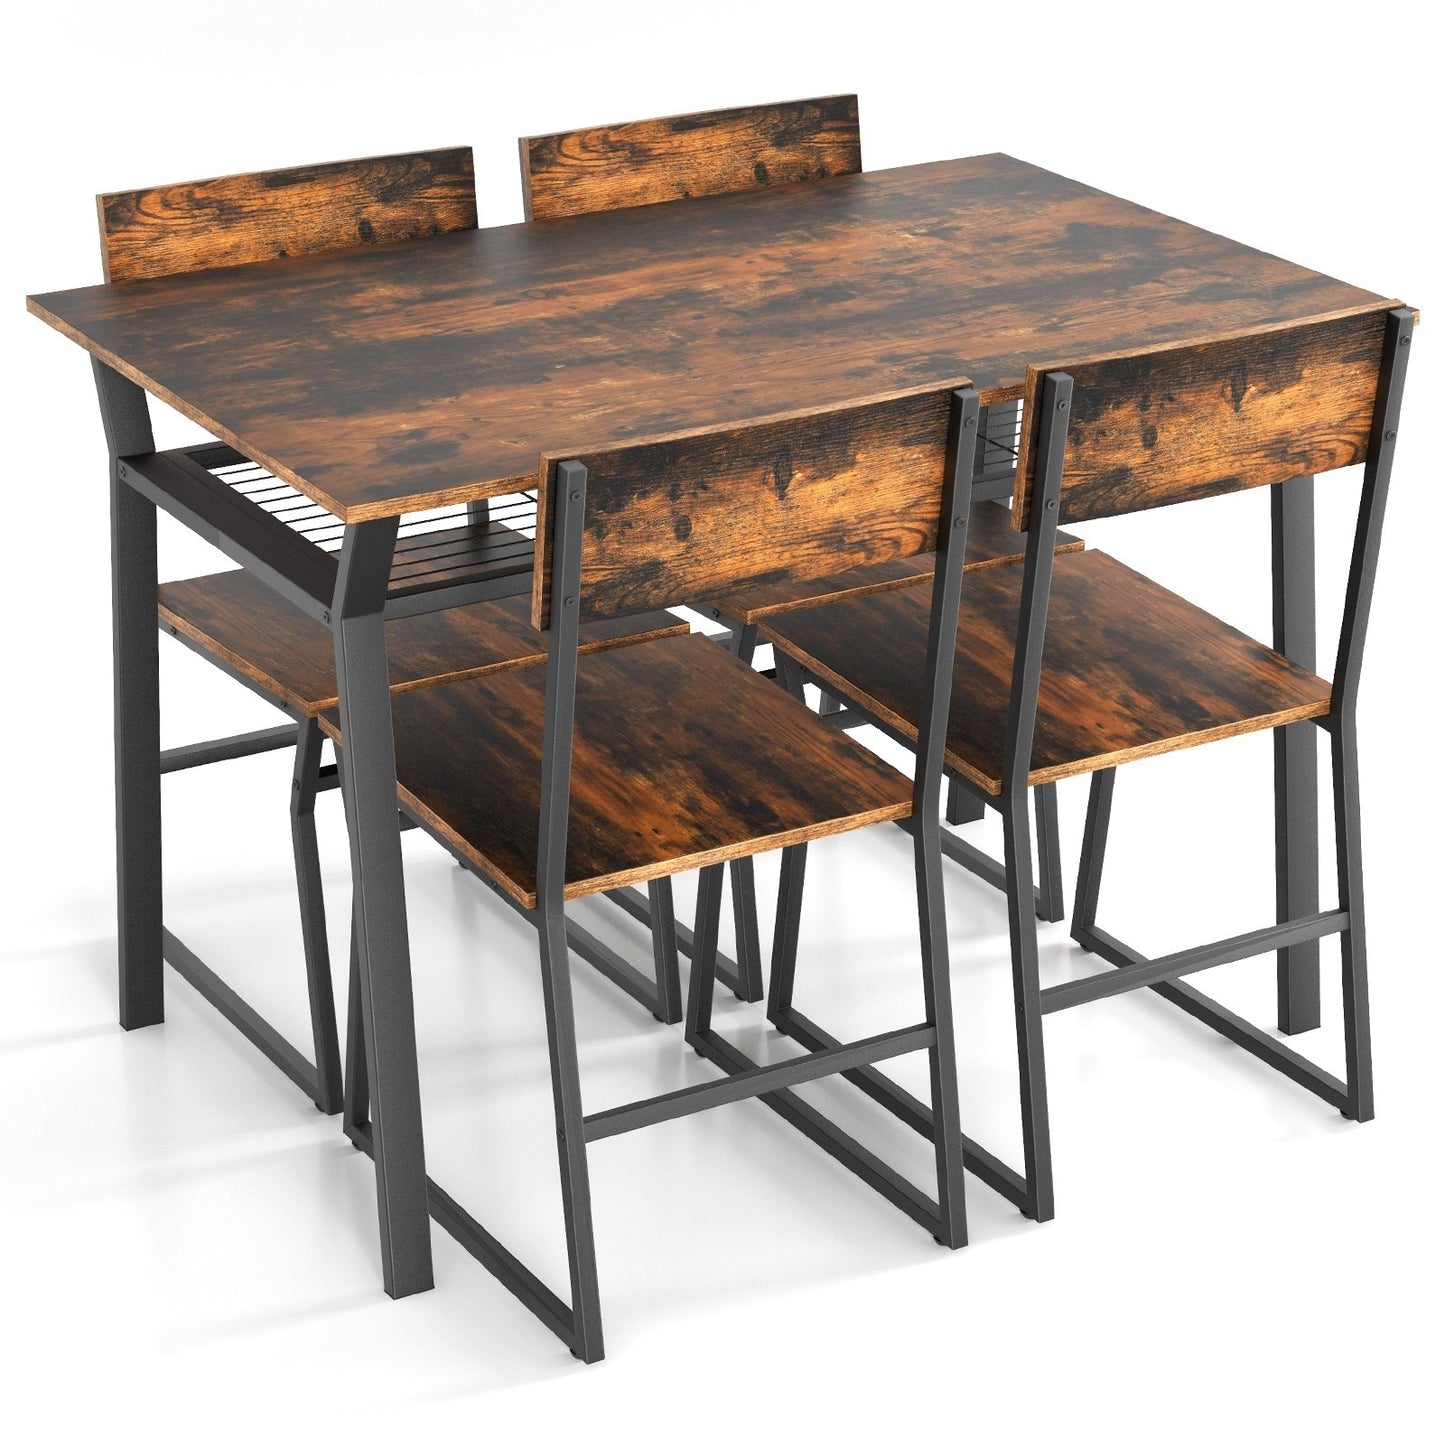 5 Piece Dining Table Set with Storage Rack and Metal Frame, Coffee